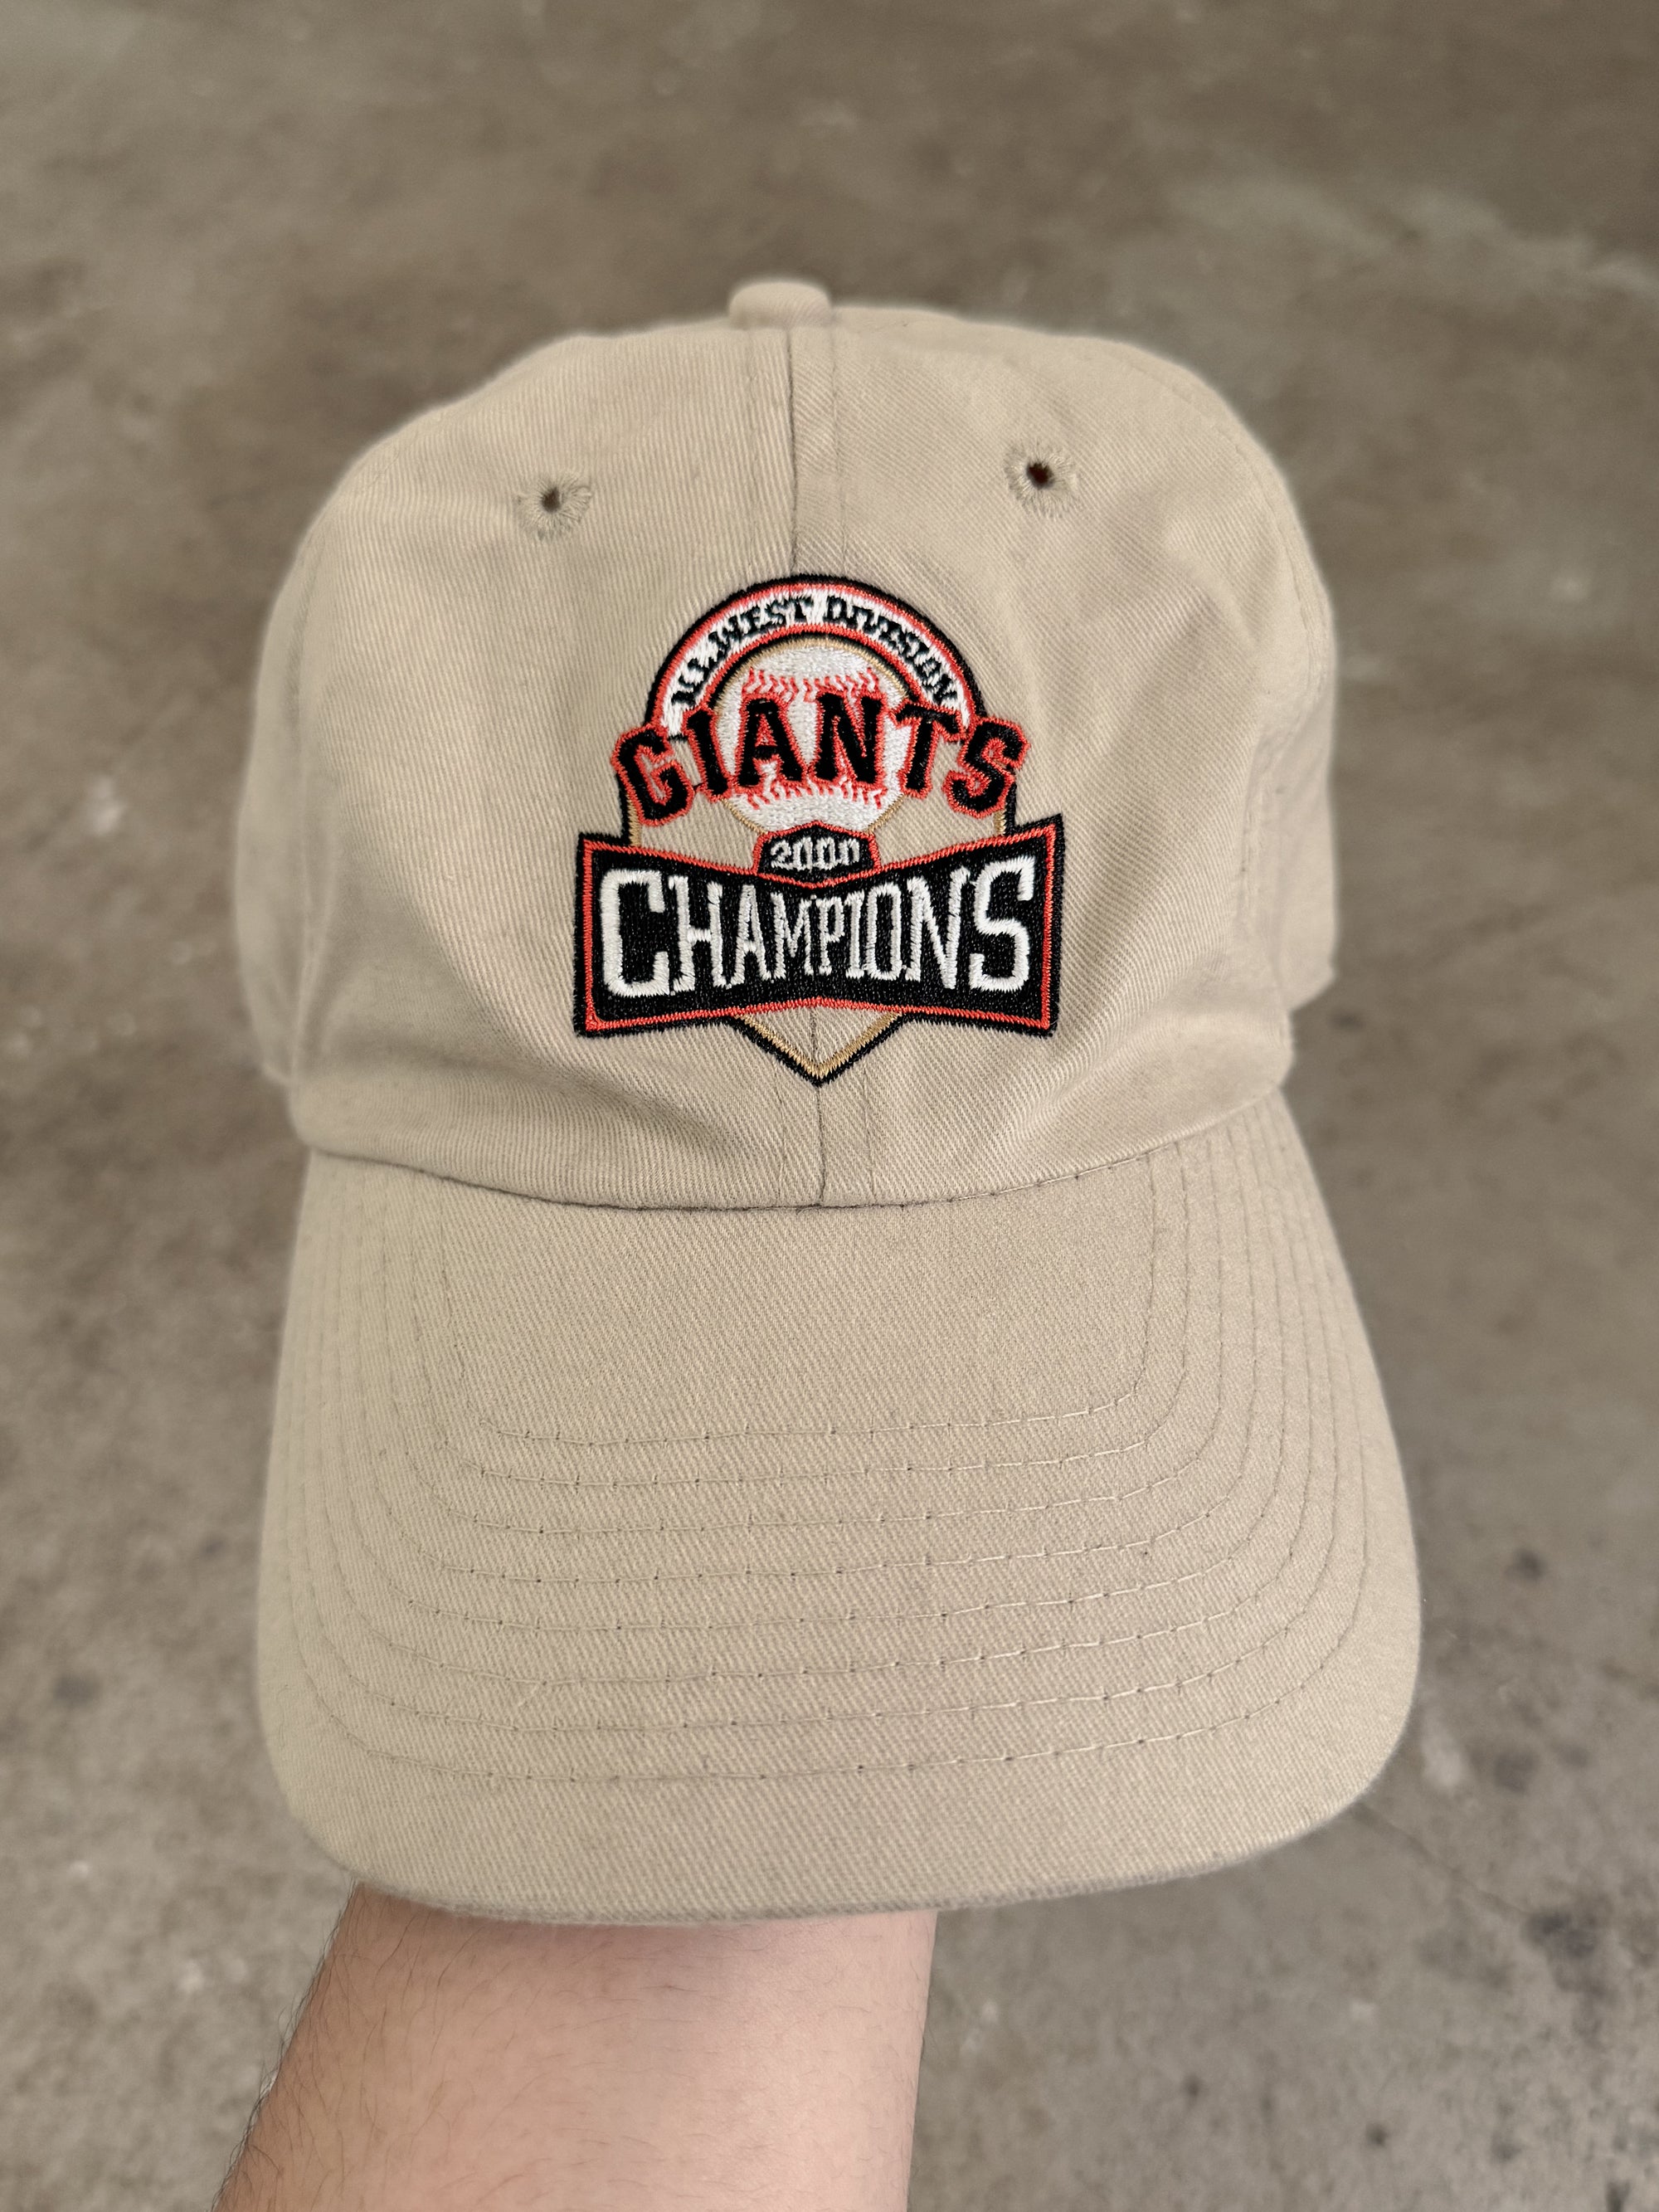 2000 "SF Giants Division Champions" Hat